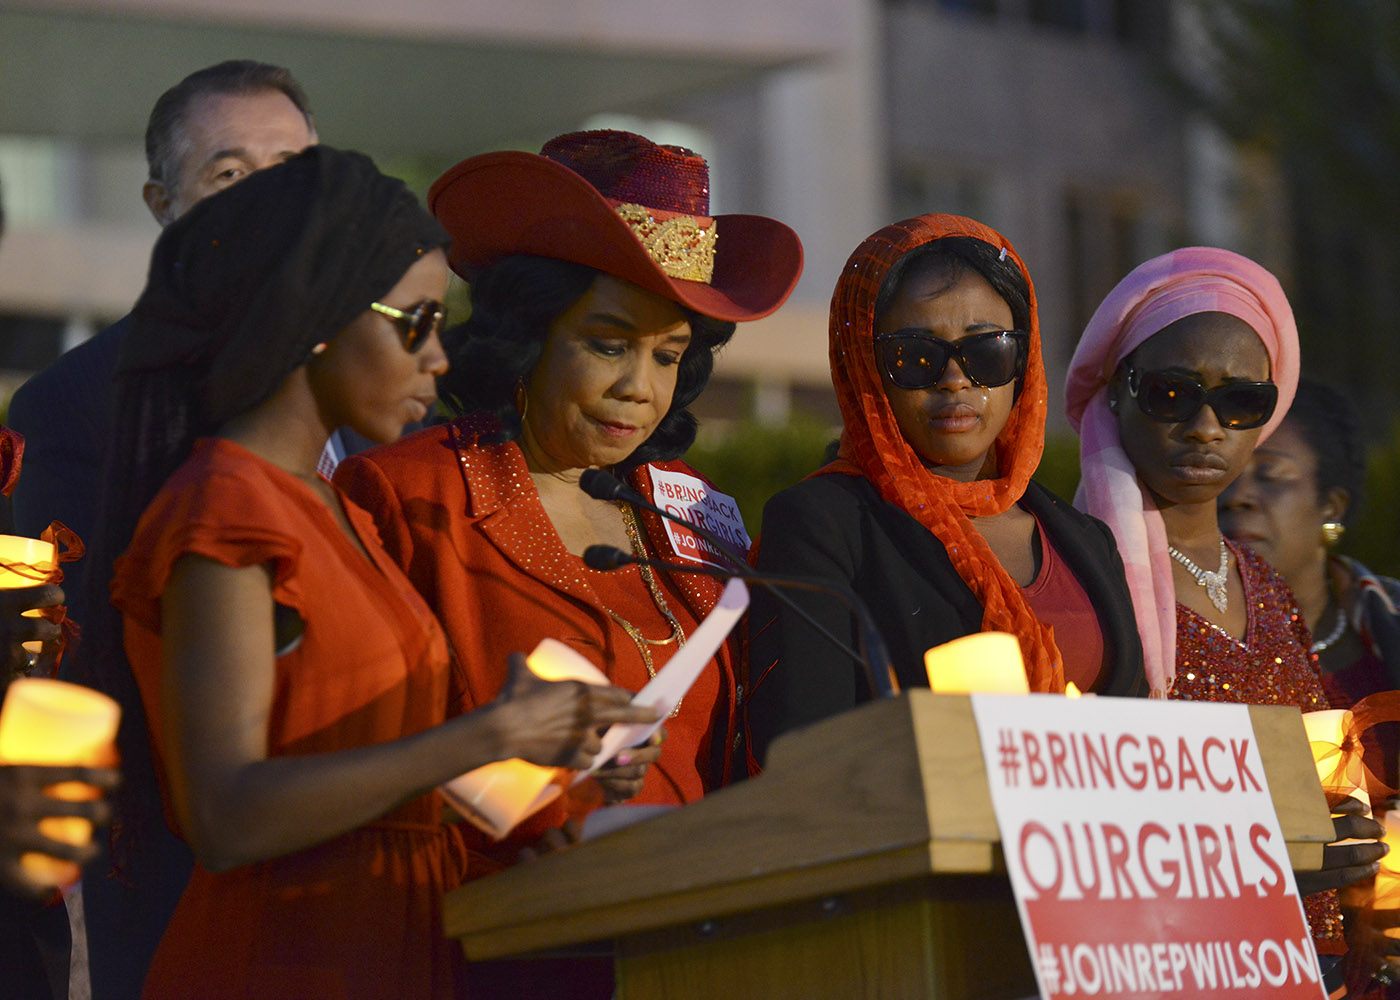 A Chibok school girl that escaped the Boko Haram kidnapping two years ago (left) reads from a list of names of the girls that are still missing as Rep. Frederica Wilson (D-Fla.) looks on during a candlelight vigil at the State Department in Washington, D.C. on April 20, 2016. (Freddie Allen/AMG/NNPA News Wire)